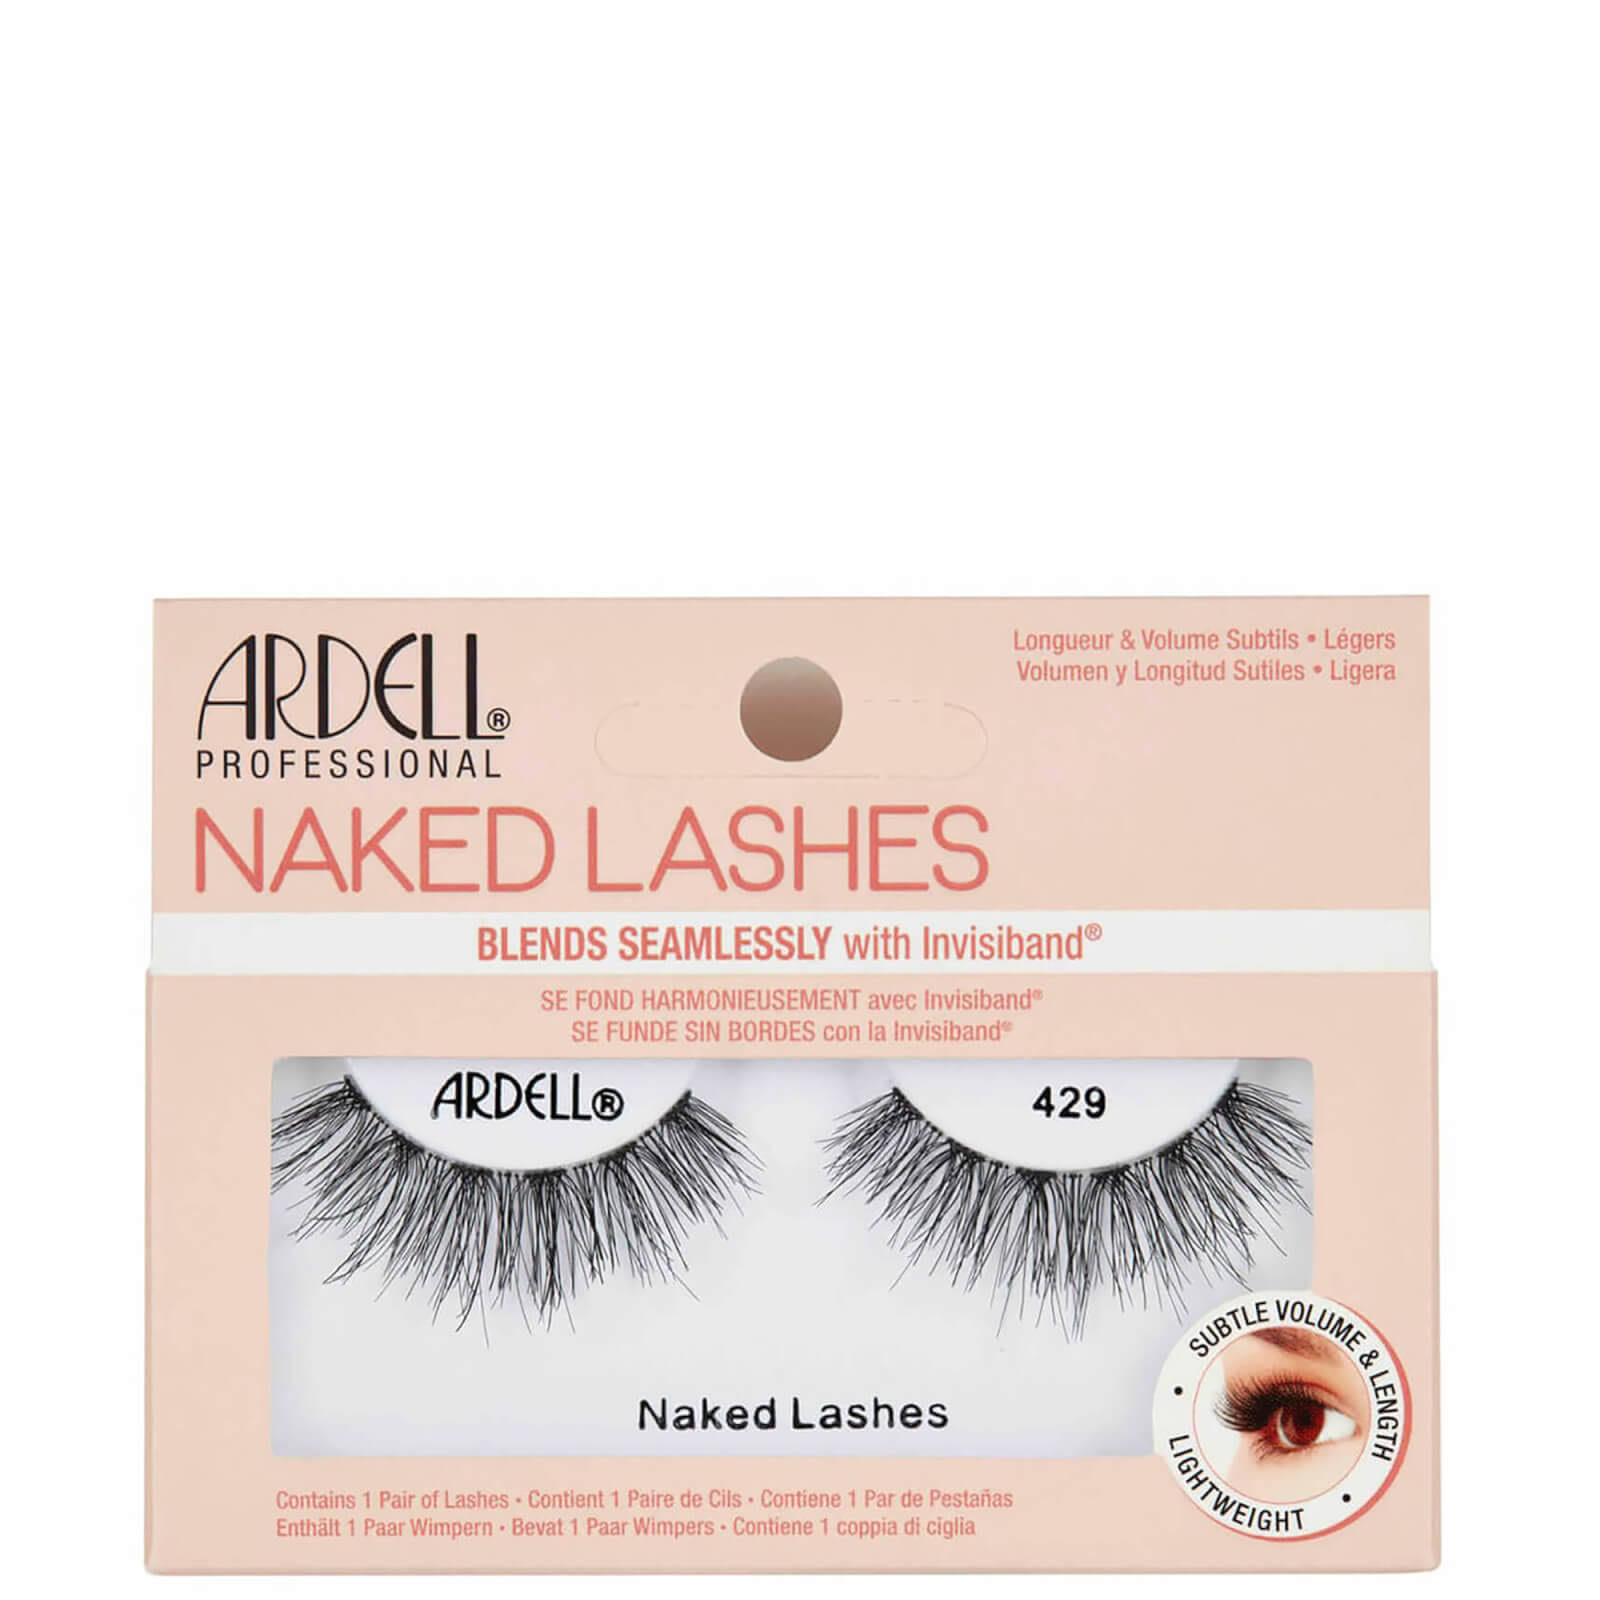 Ardell Naked Lashes Lashes, 429 - 1 pair